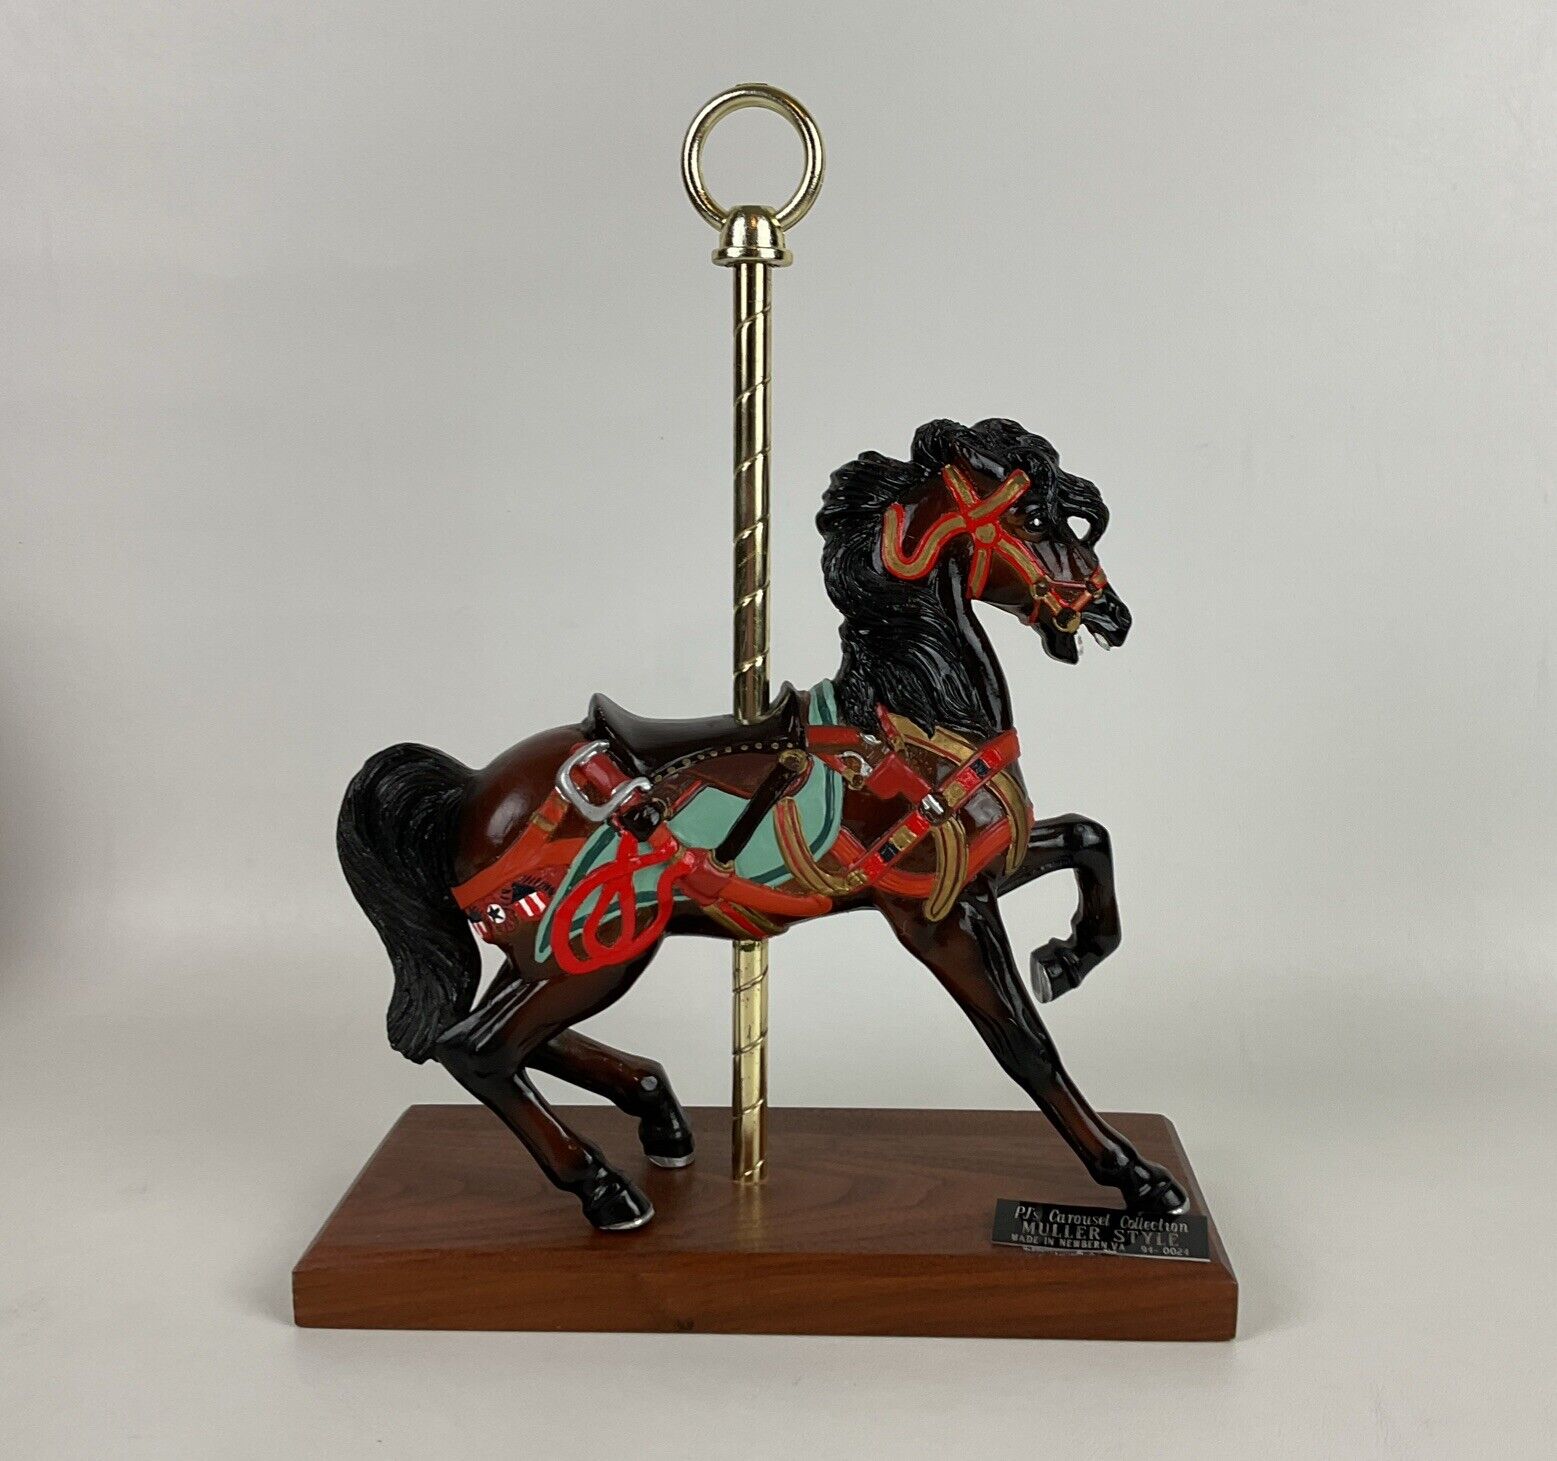 PJ'S CAROUSEL HORSE MULLER COLLECTION SIGNED BY MICHELLE PHELPS